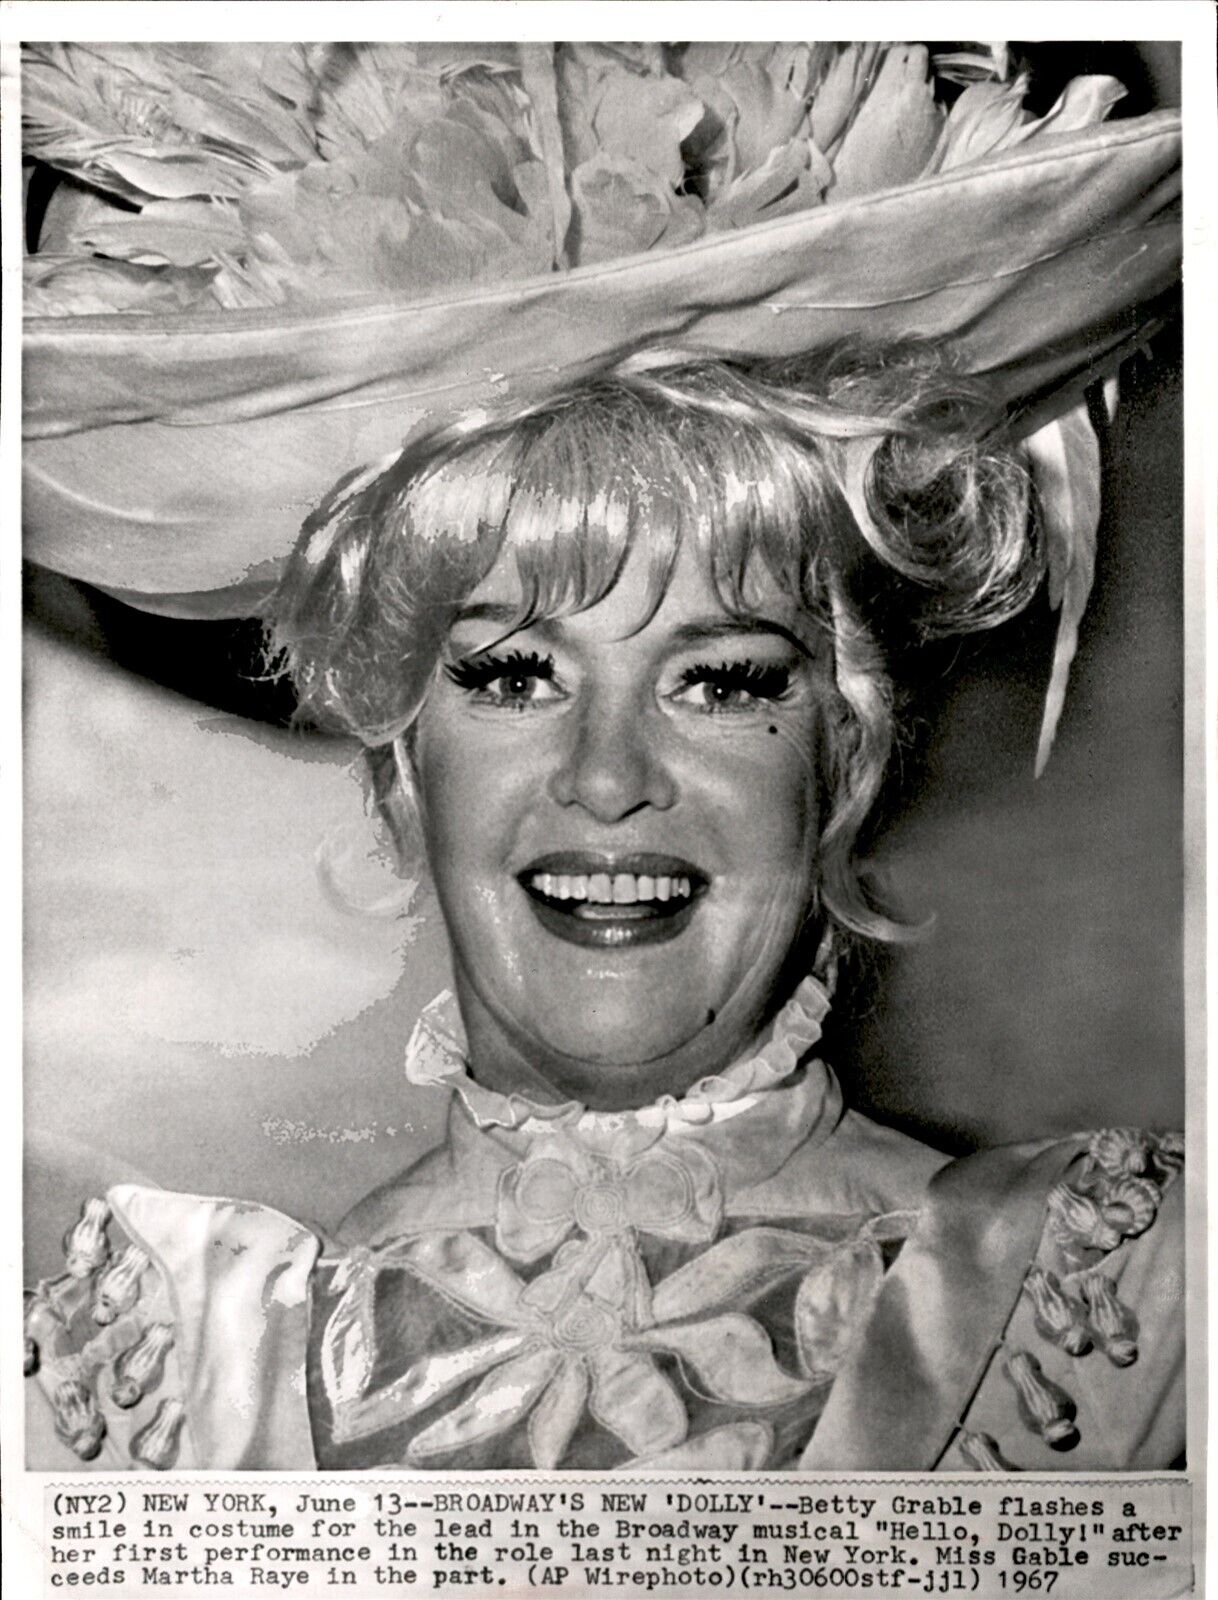 LG49 1967 AP Wire Photo NEW YORK BROADWAY\'S NEW HELLO DOLLY STAR BETTY GRABLE